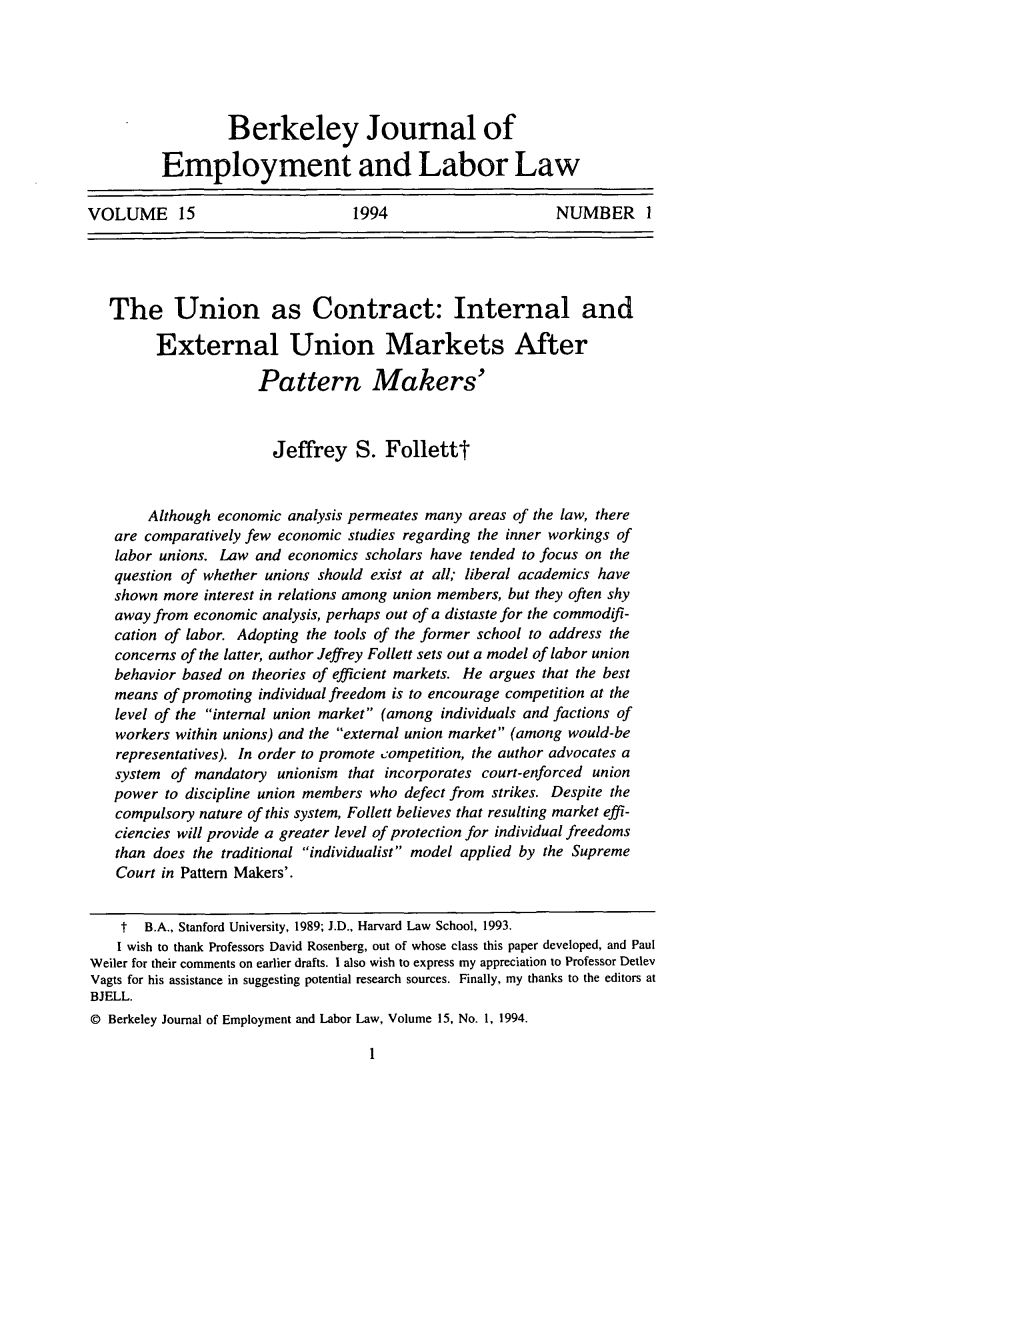 The Union As Contract: Internal and External Union Markets After Pattern Makers'